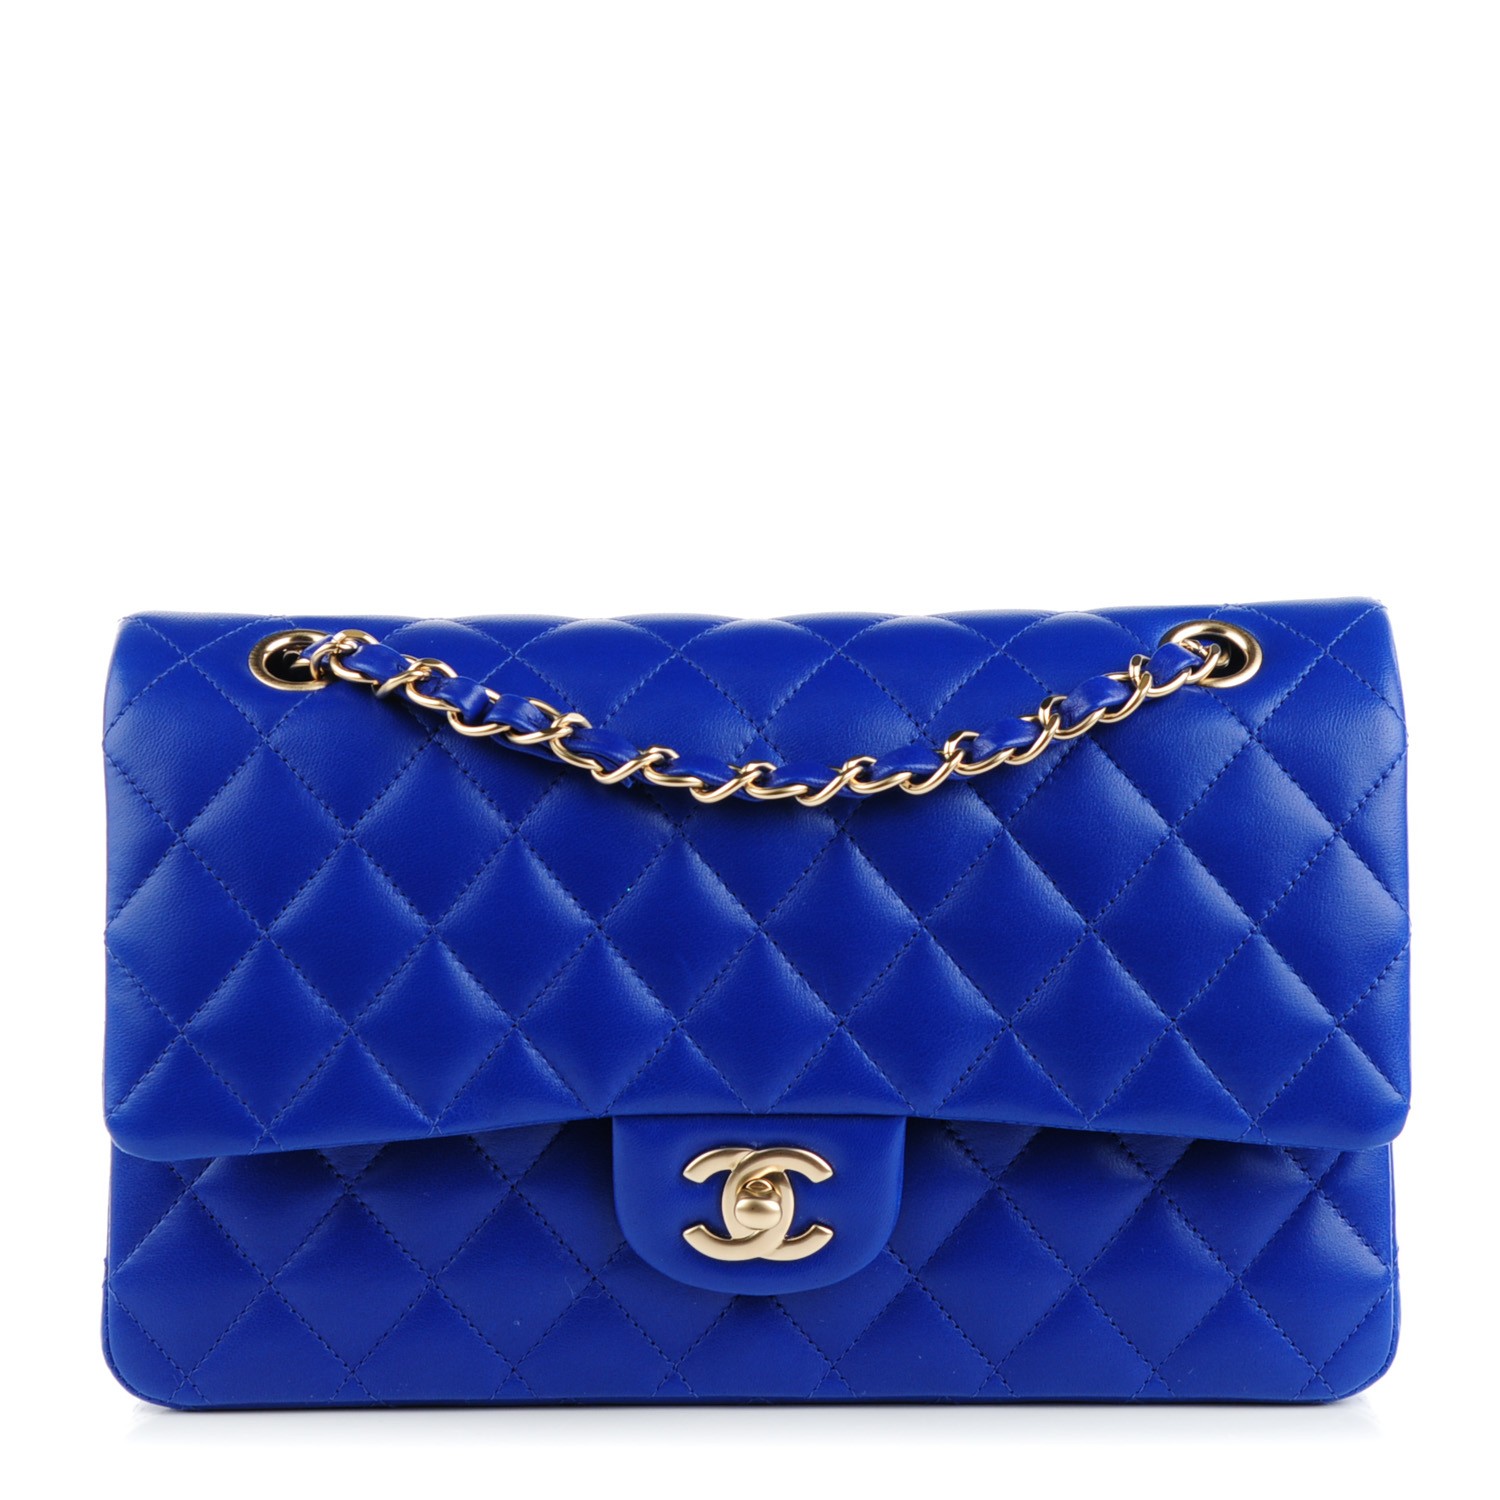 CHANEL Lambskin Quilted Medium Double Flap Blue 131818 | FASHIONPHILE